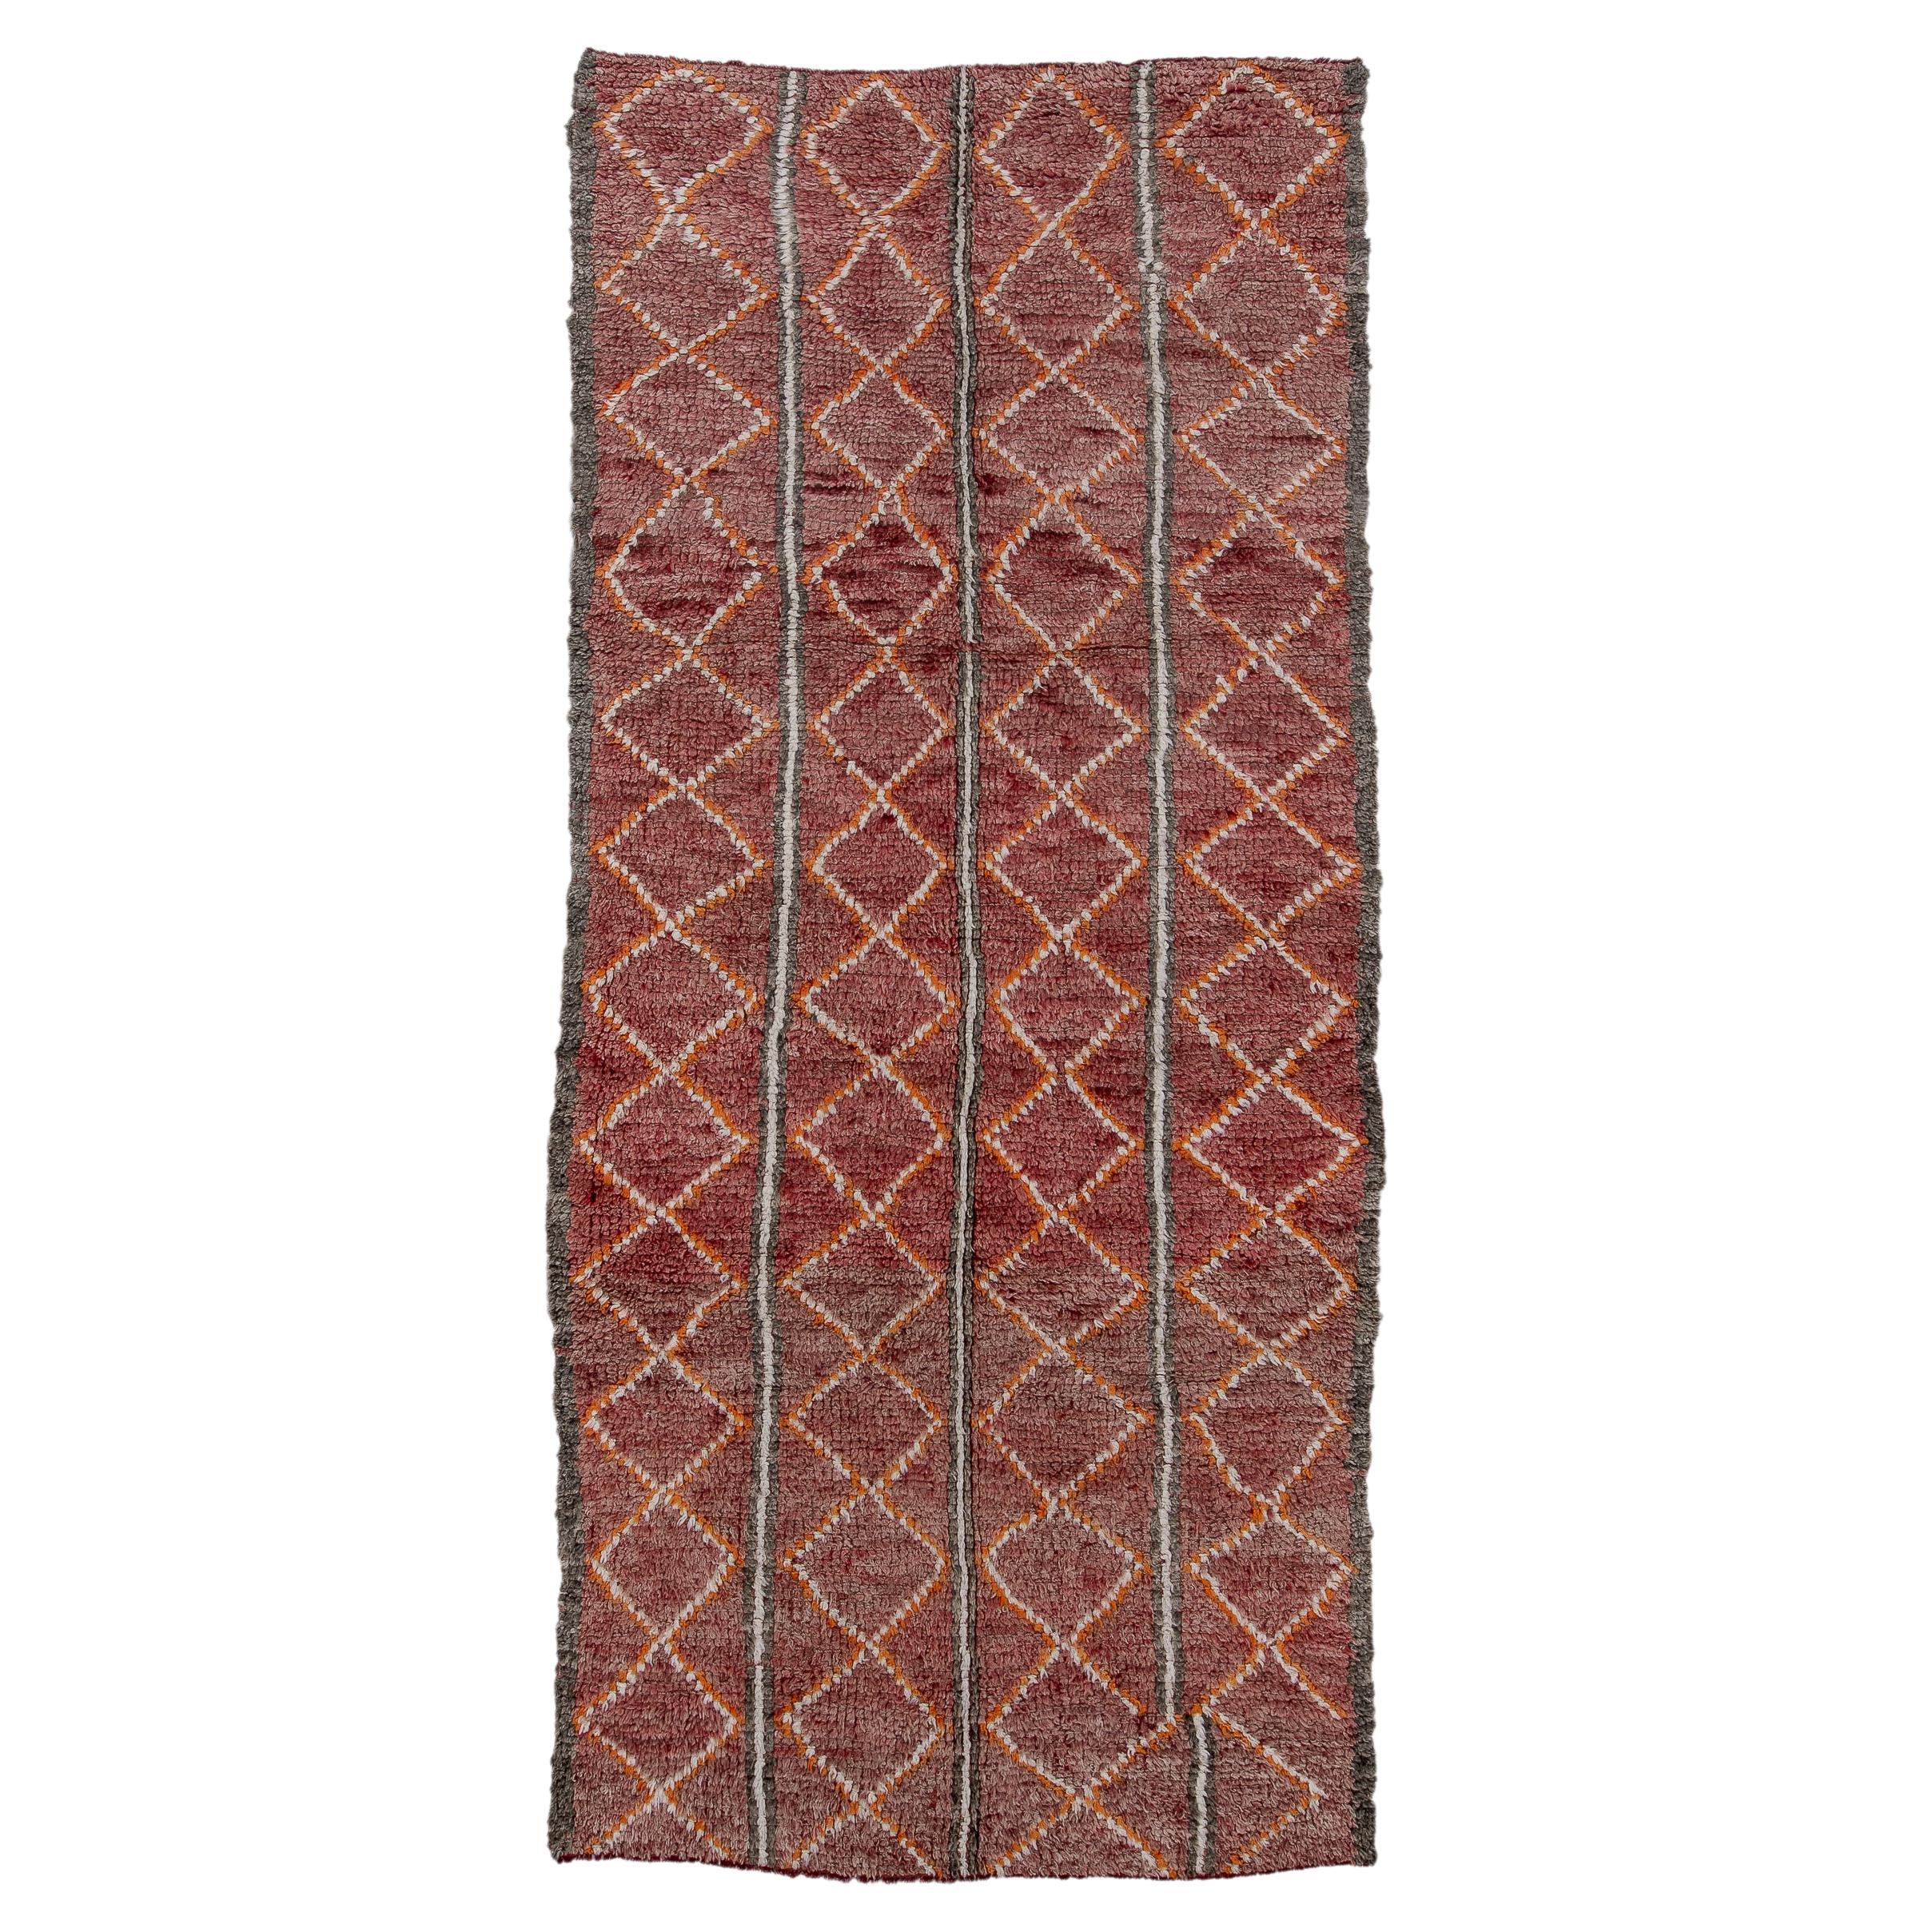 Village Allover Rug Red and Tan